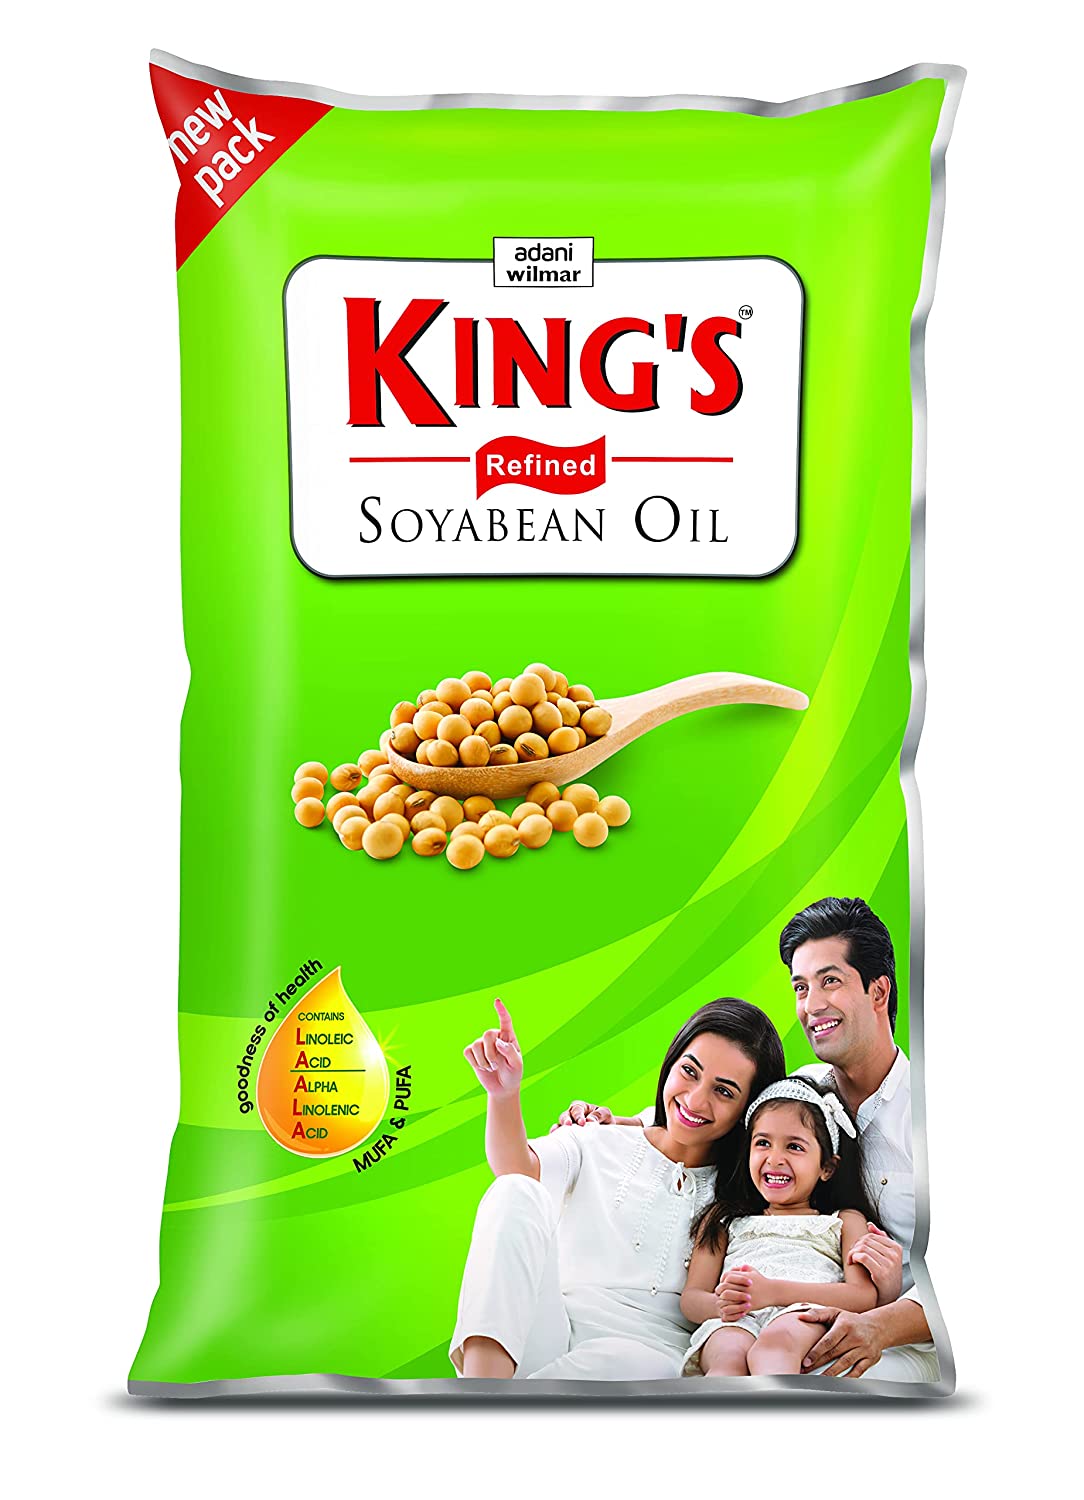 King's refined soyabean oil pouch